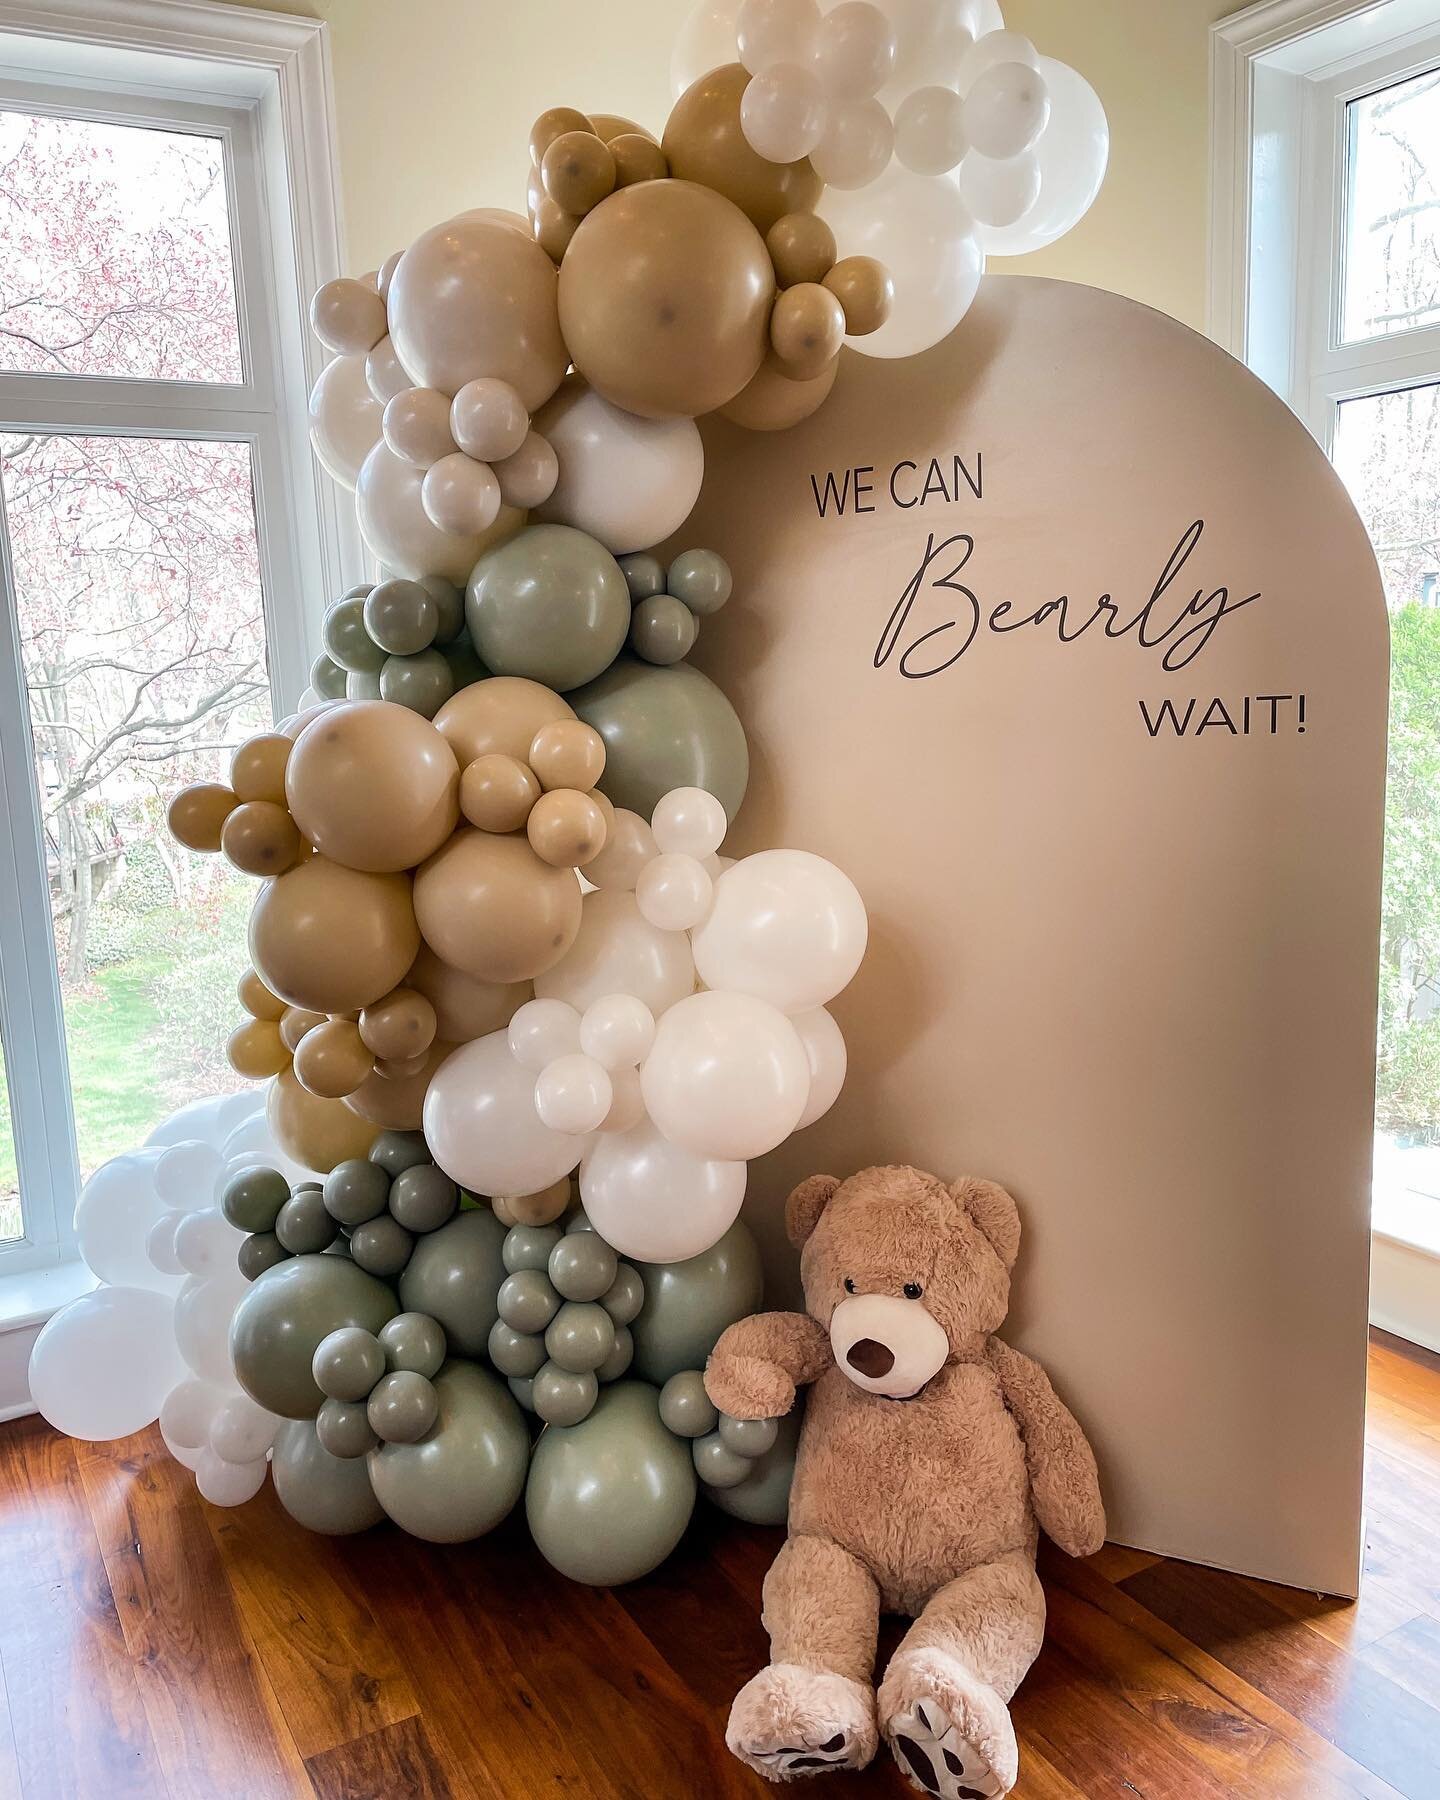 We could bearly wait for this event 🐻

How dreamy were these custom colors! 

#babyboy #babyshowers #babyshowerideas #babyshowerparty #babyshowerdecor #decoration #babyshower #event #balloonarch #balloongarland #balloondecoration #balloonsdecoration